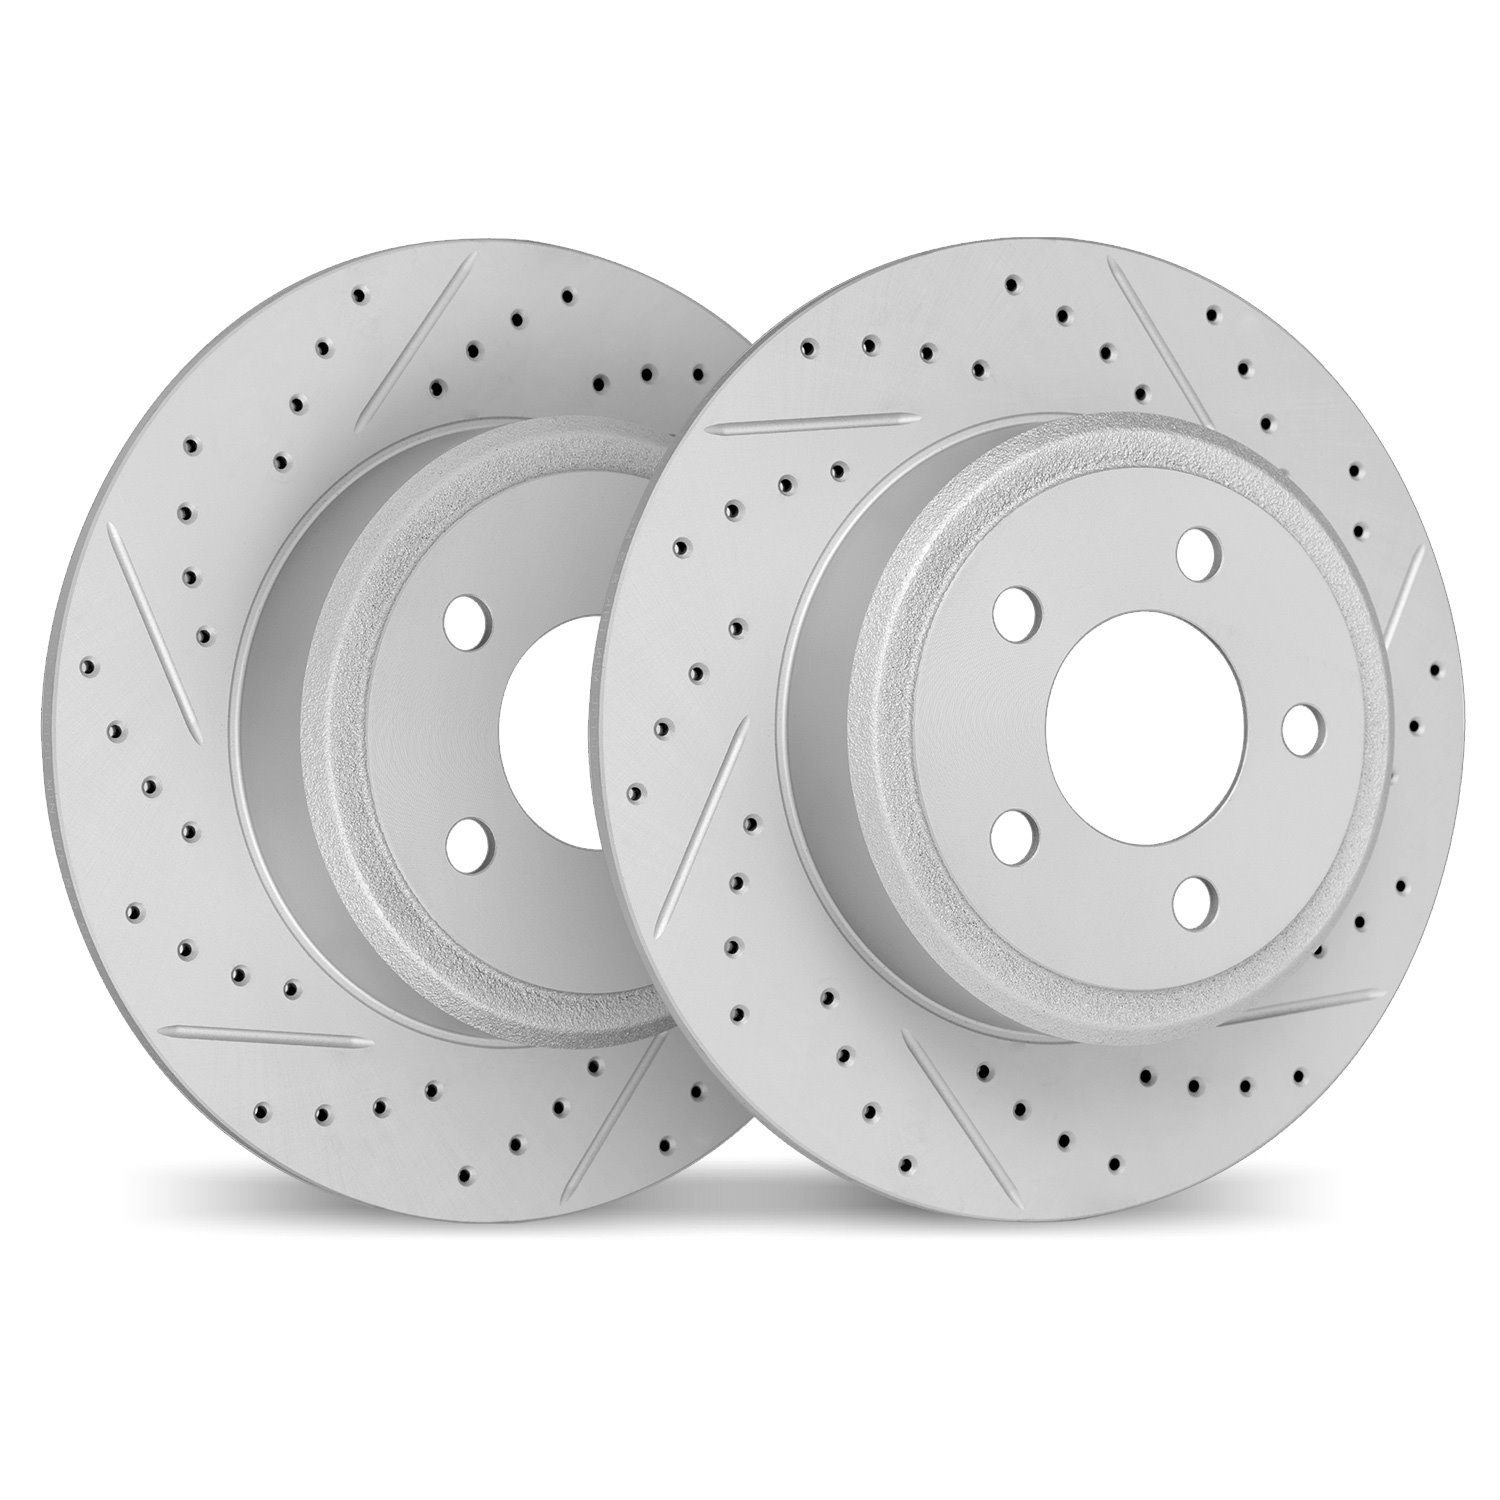 2002-31098 Geoperformance Drilled/Slotted Brake Rotors, 2003-2006 BMW, Position: Rear